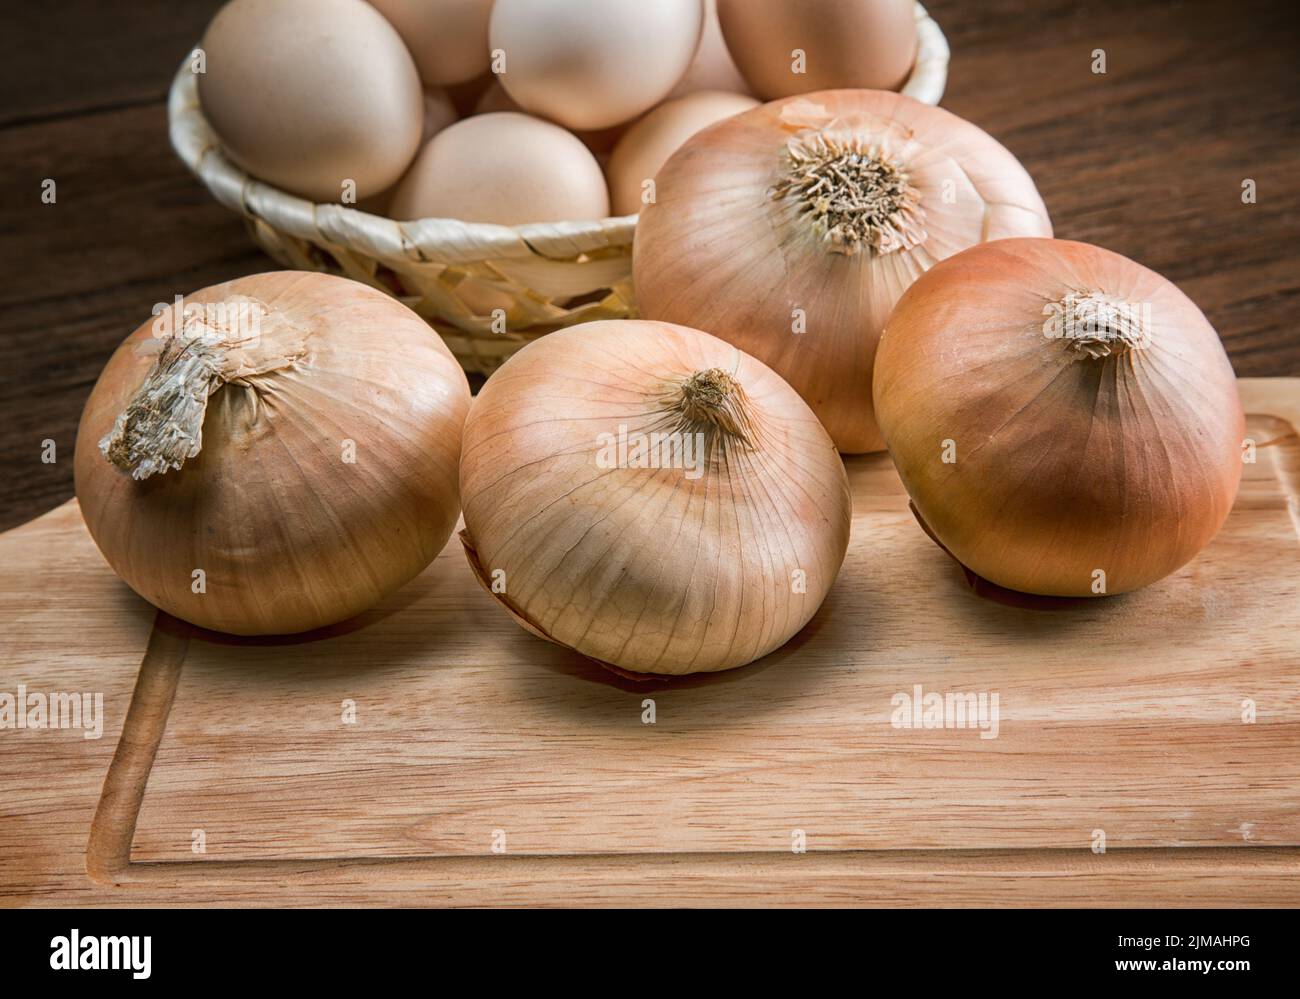 Still life with onions and quail eggs on a kitchen table Stock Photo